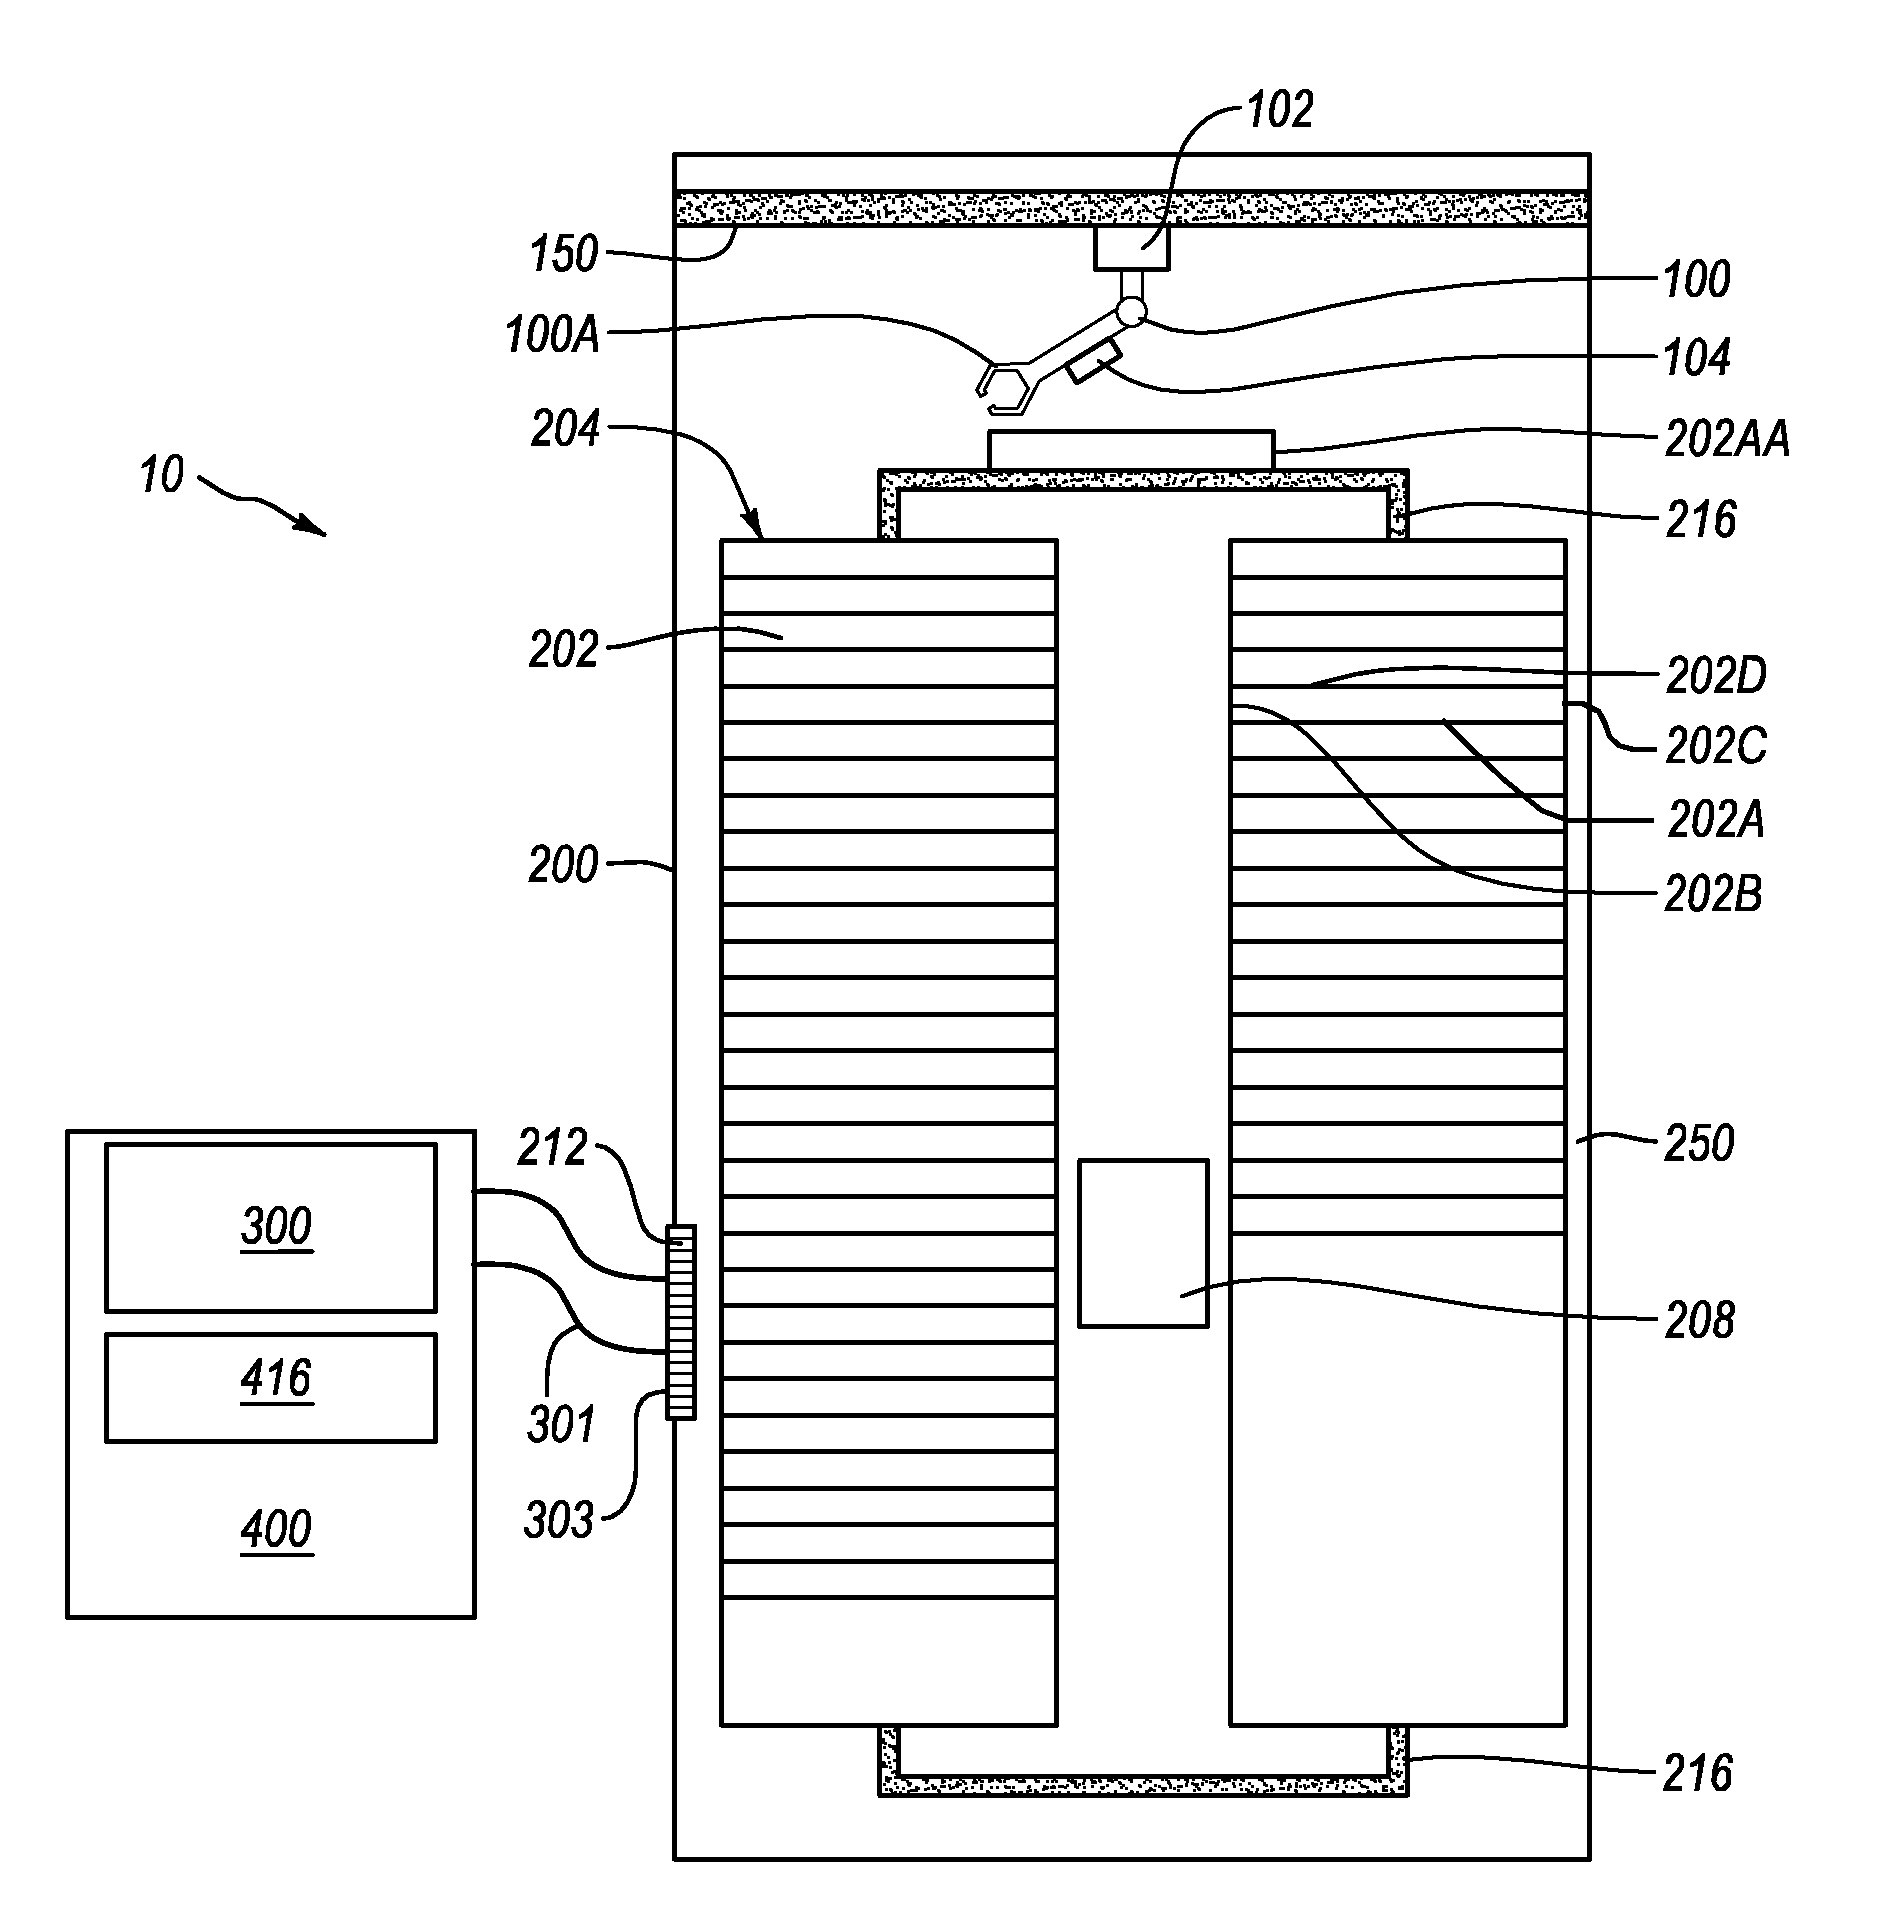 System and methods for archiving and retrieving specimens